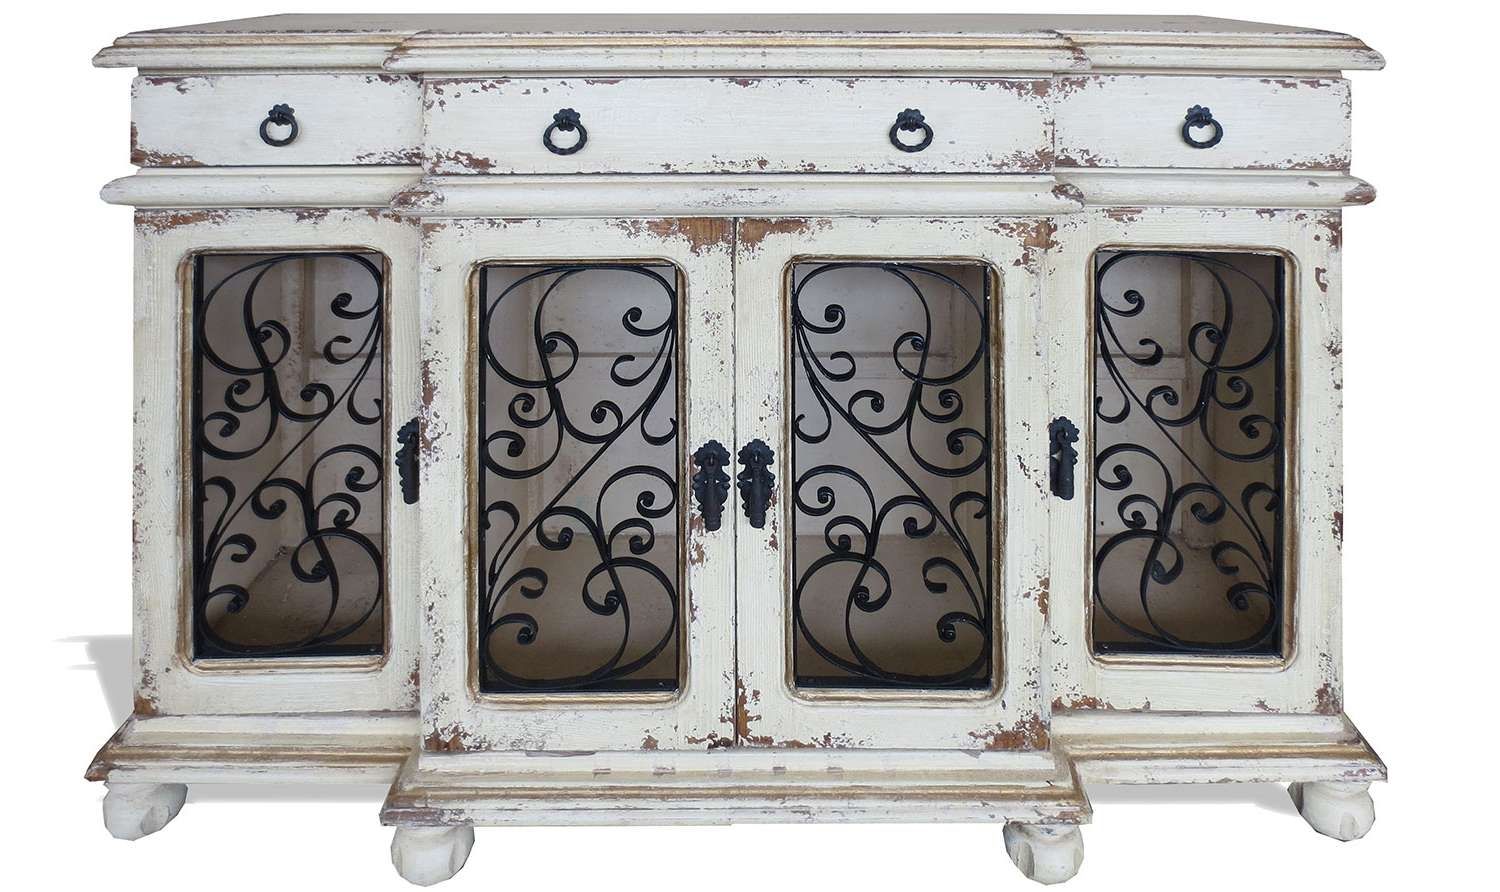 St. Domingue Sideboard With Wrought Iron | The Koenig Collection Throughout Magic The Gathering Sideboards (Gallery 20 of 24)